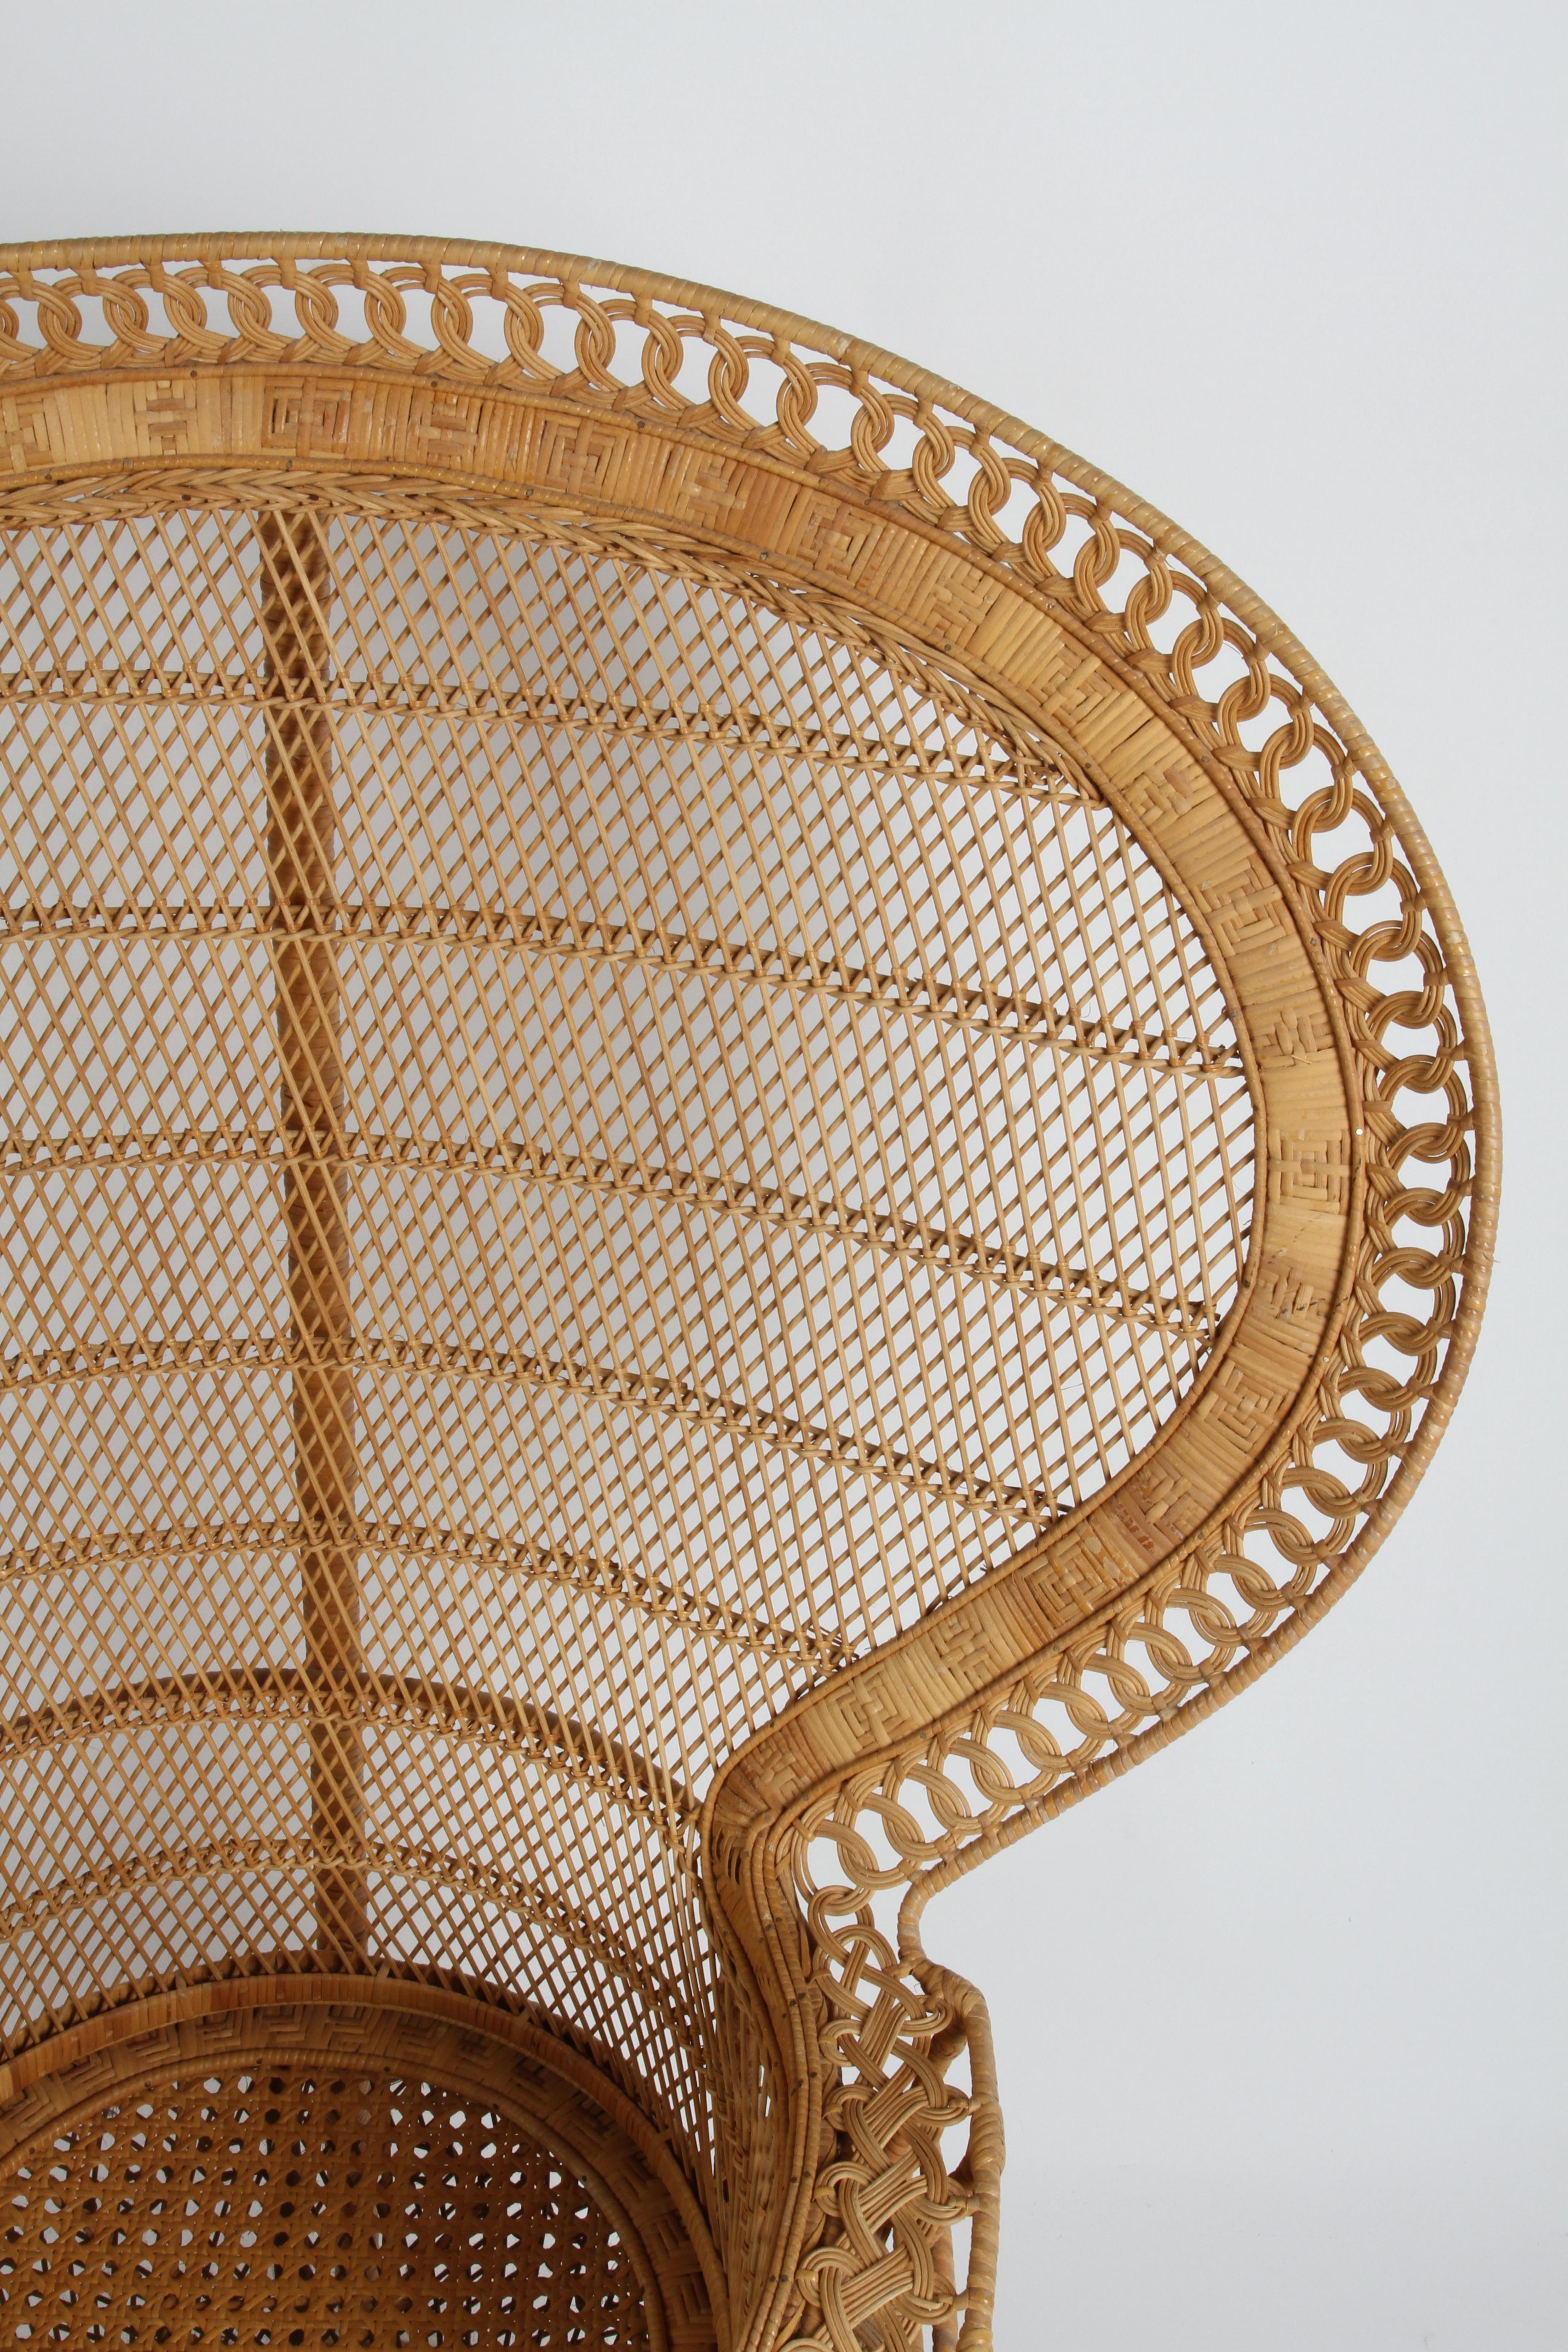 Vintage 1970s Rattan & Wicker Handcrafted Boho Chic Emmanuelle Peacock Chair For Sale 9